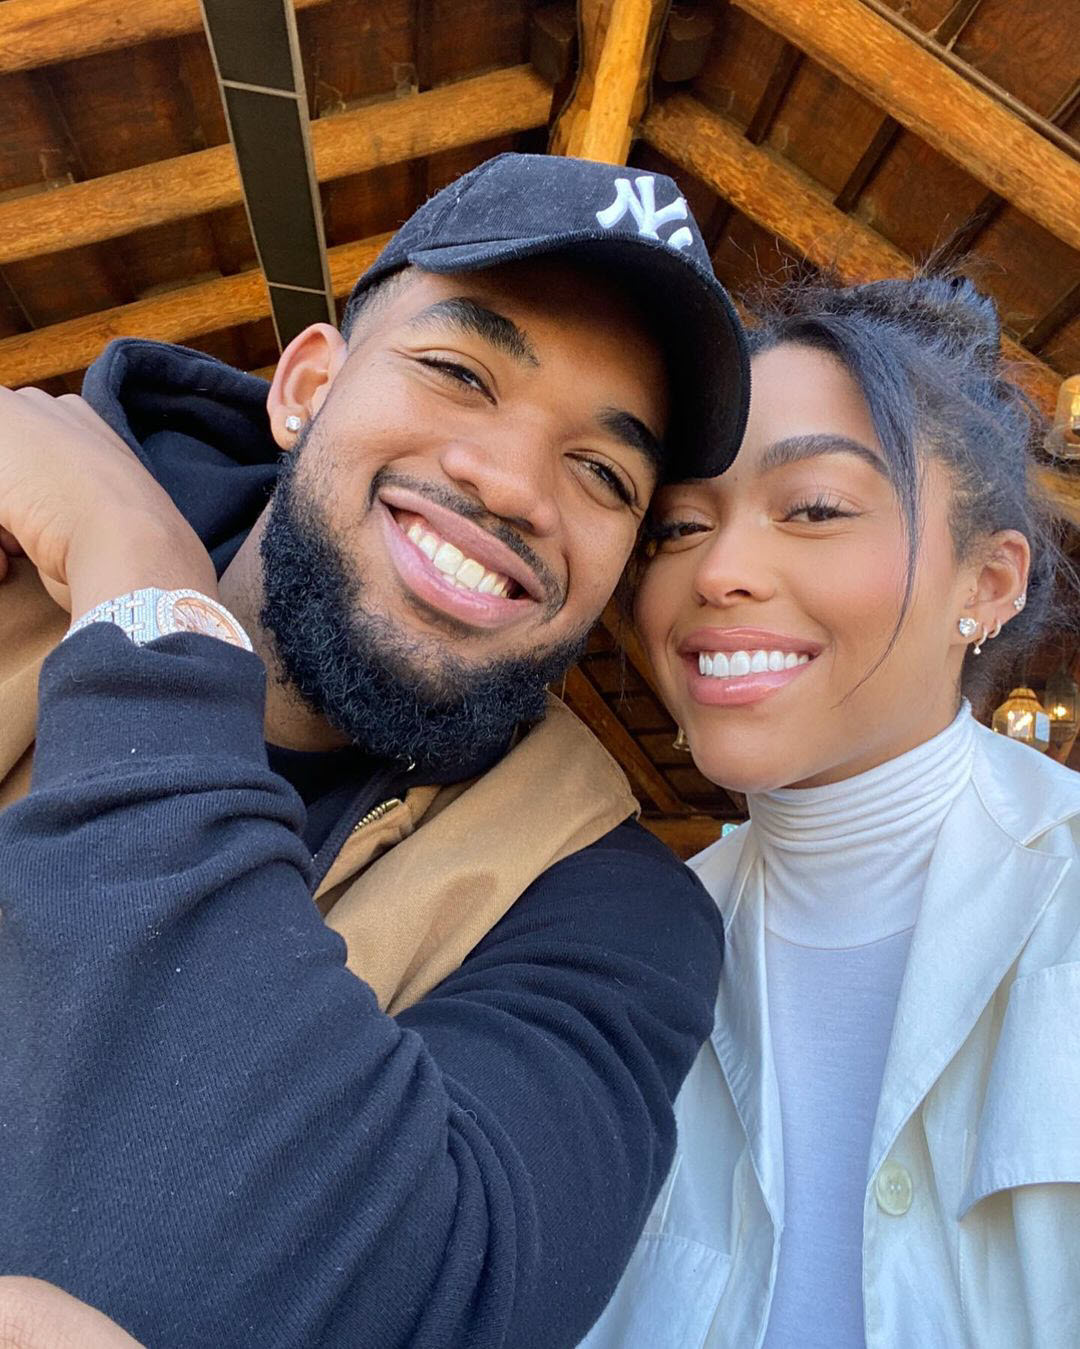 Jordyn Woods Teases New Fitness-Related Project on Instagram